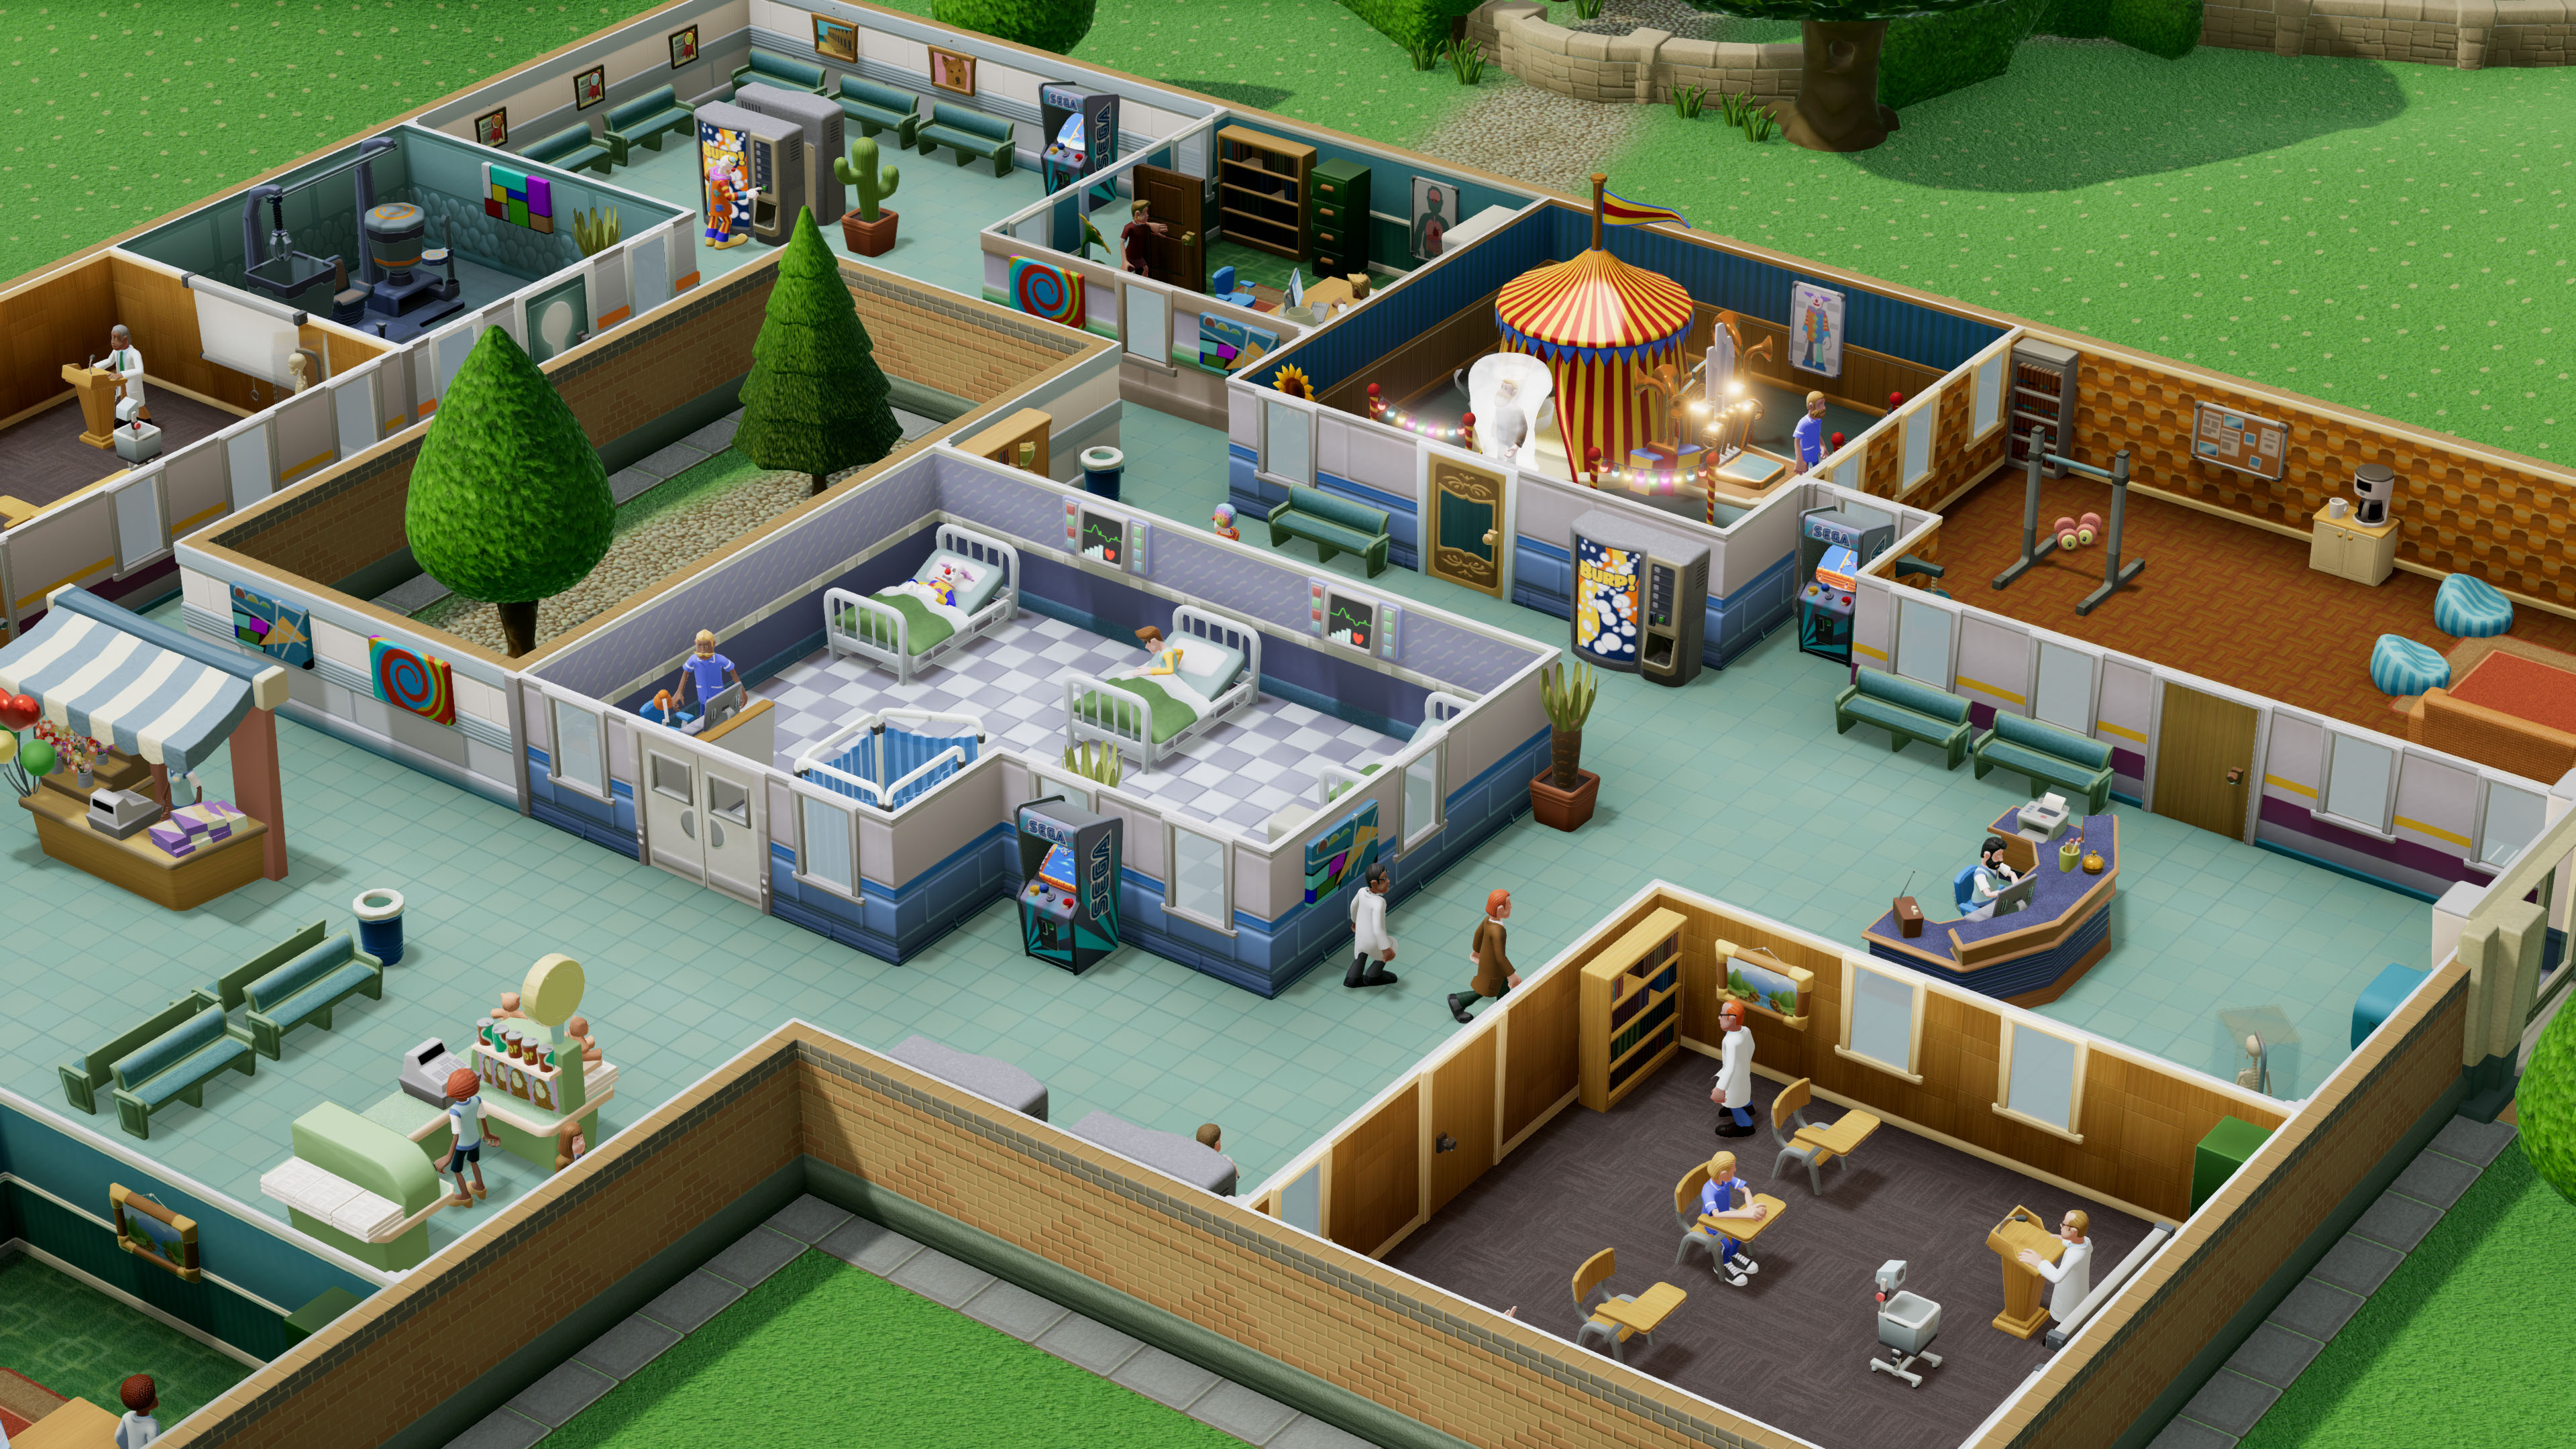 theme hospital zoom out